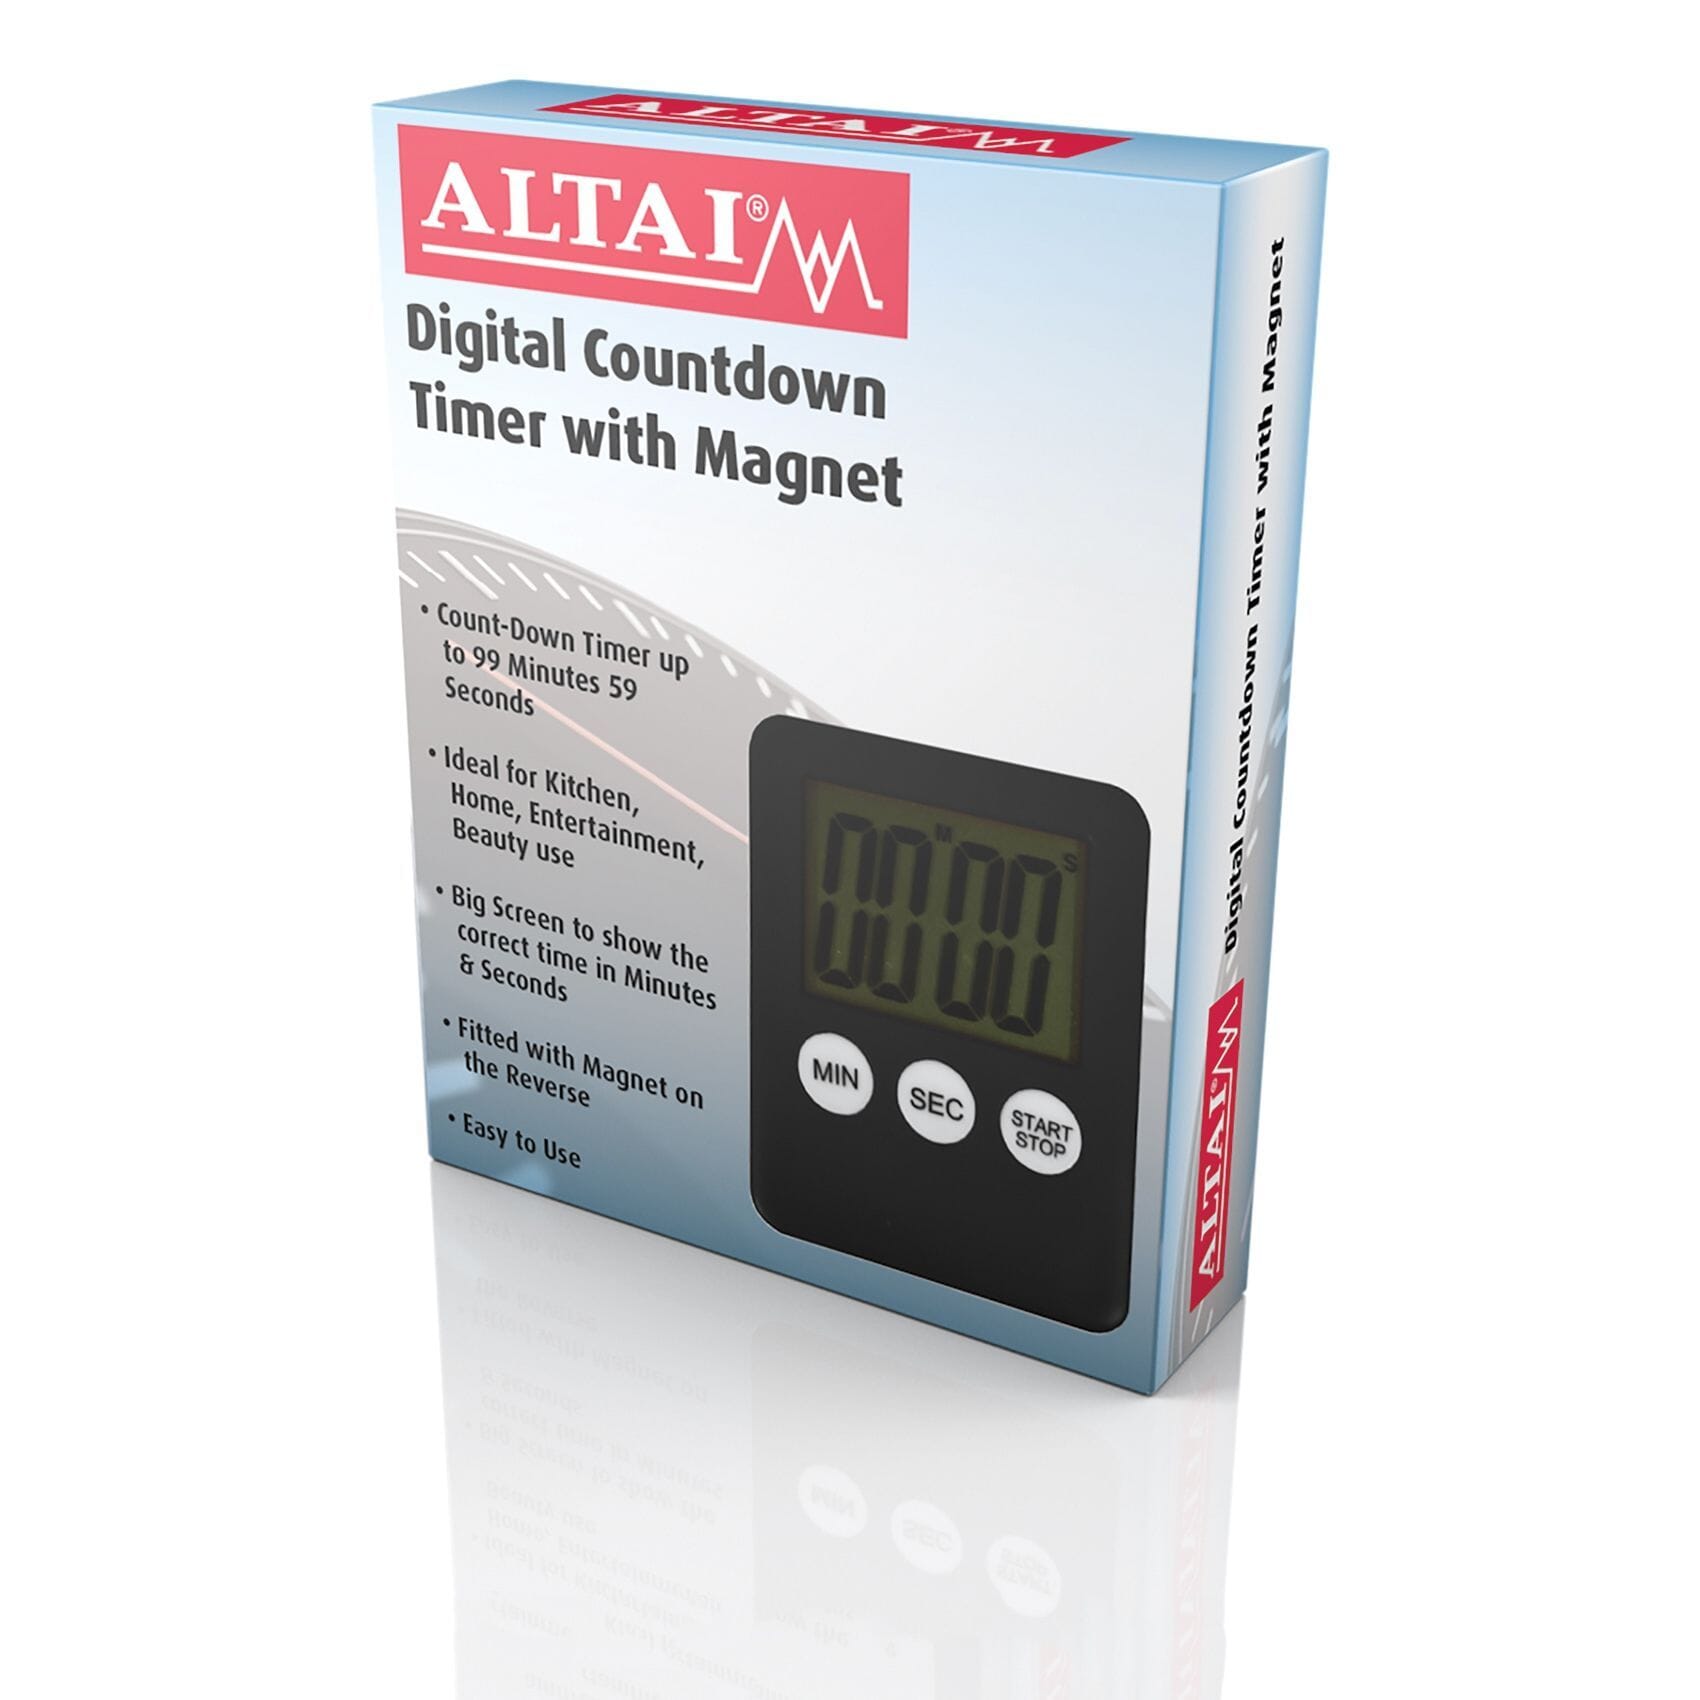 View Altai Large Display Digital Countdown Timer with Magnet information